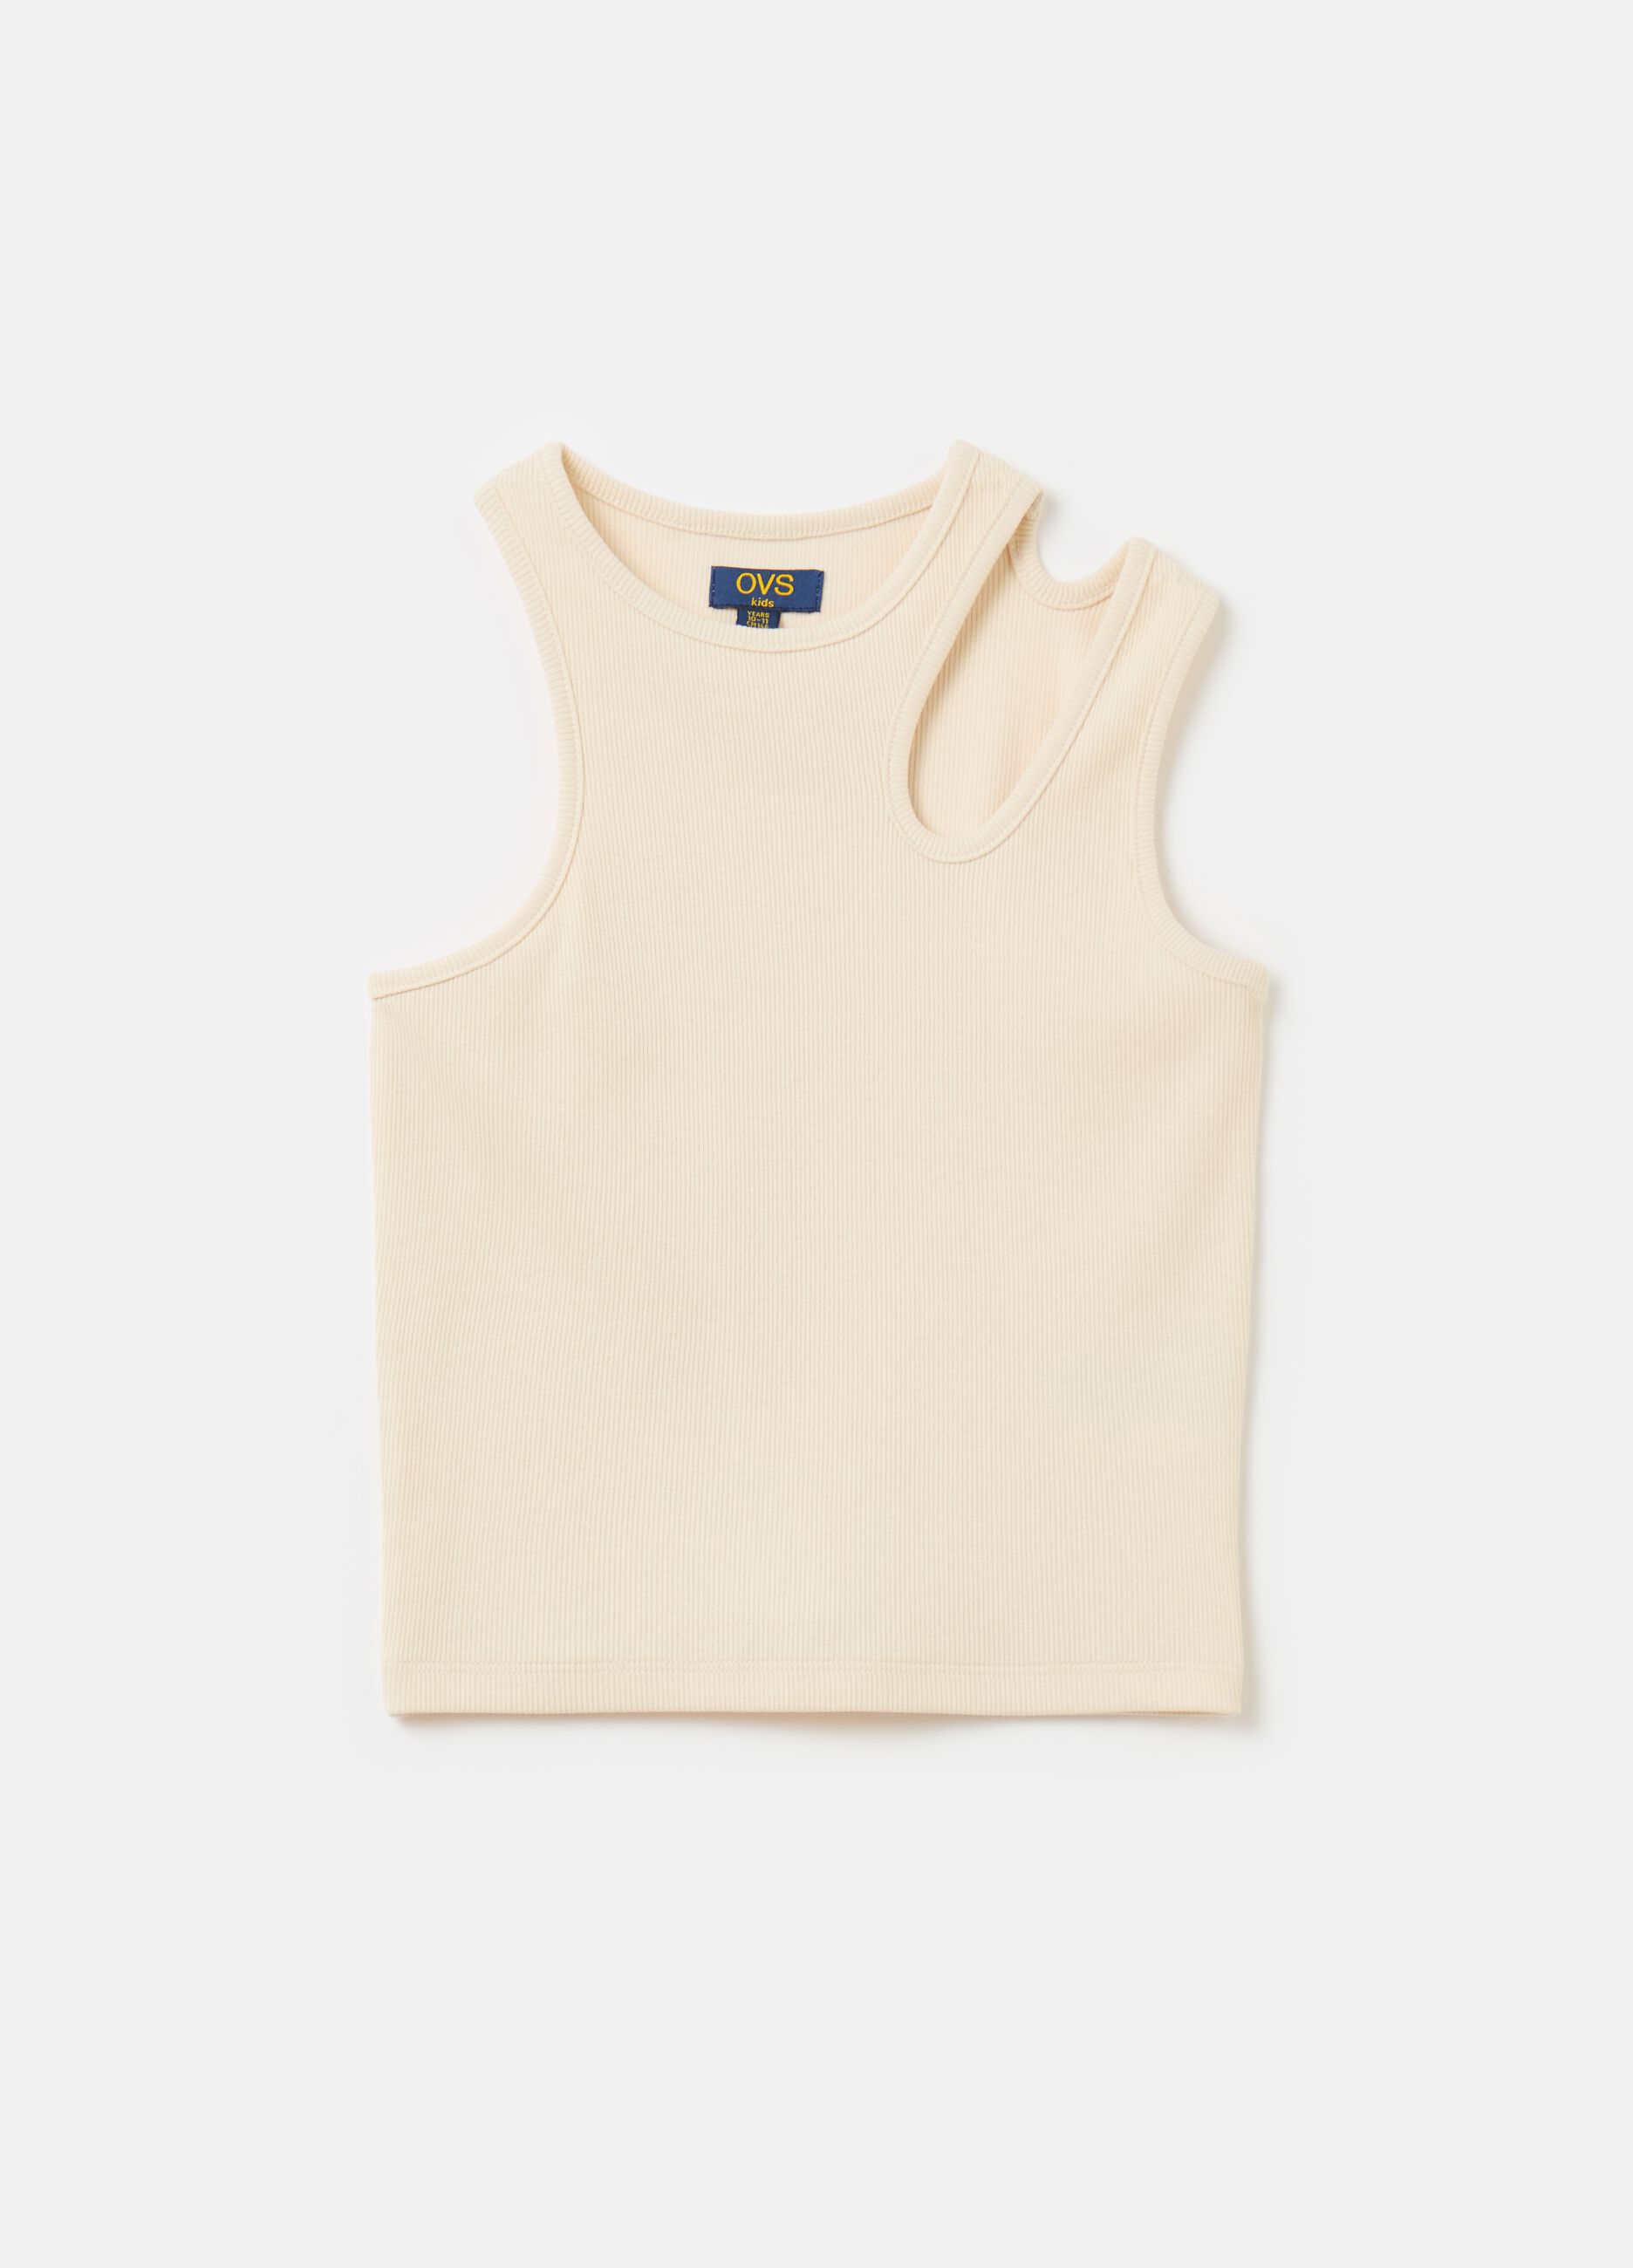 Asymmetric tank top with cut-out detail